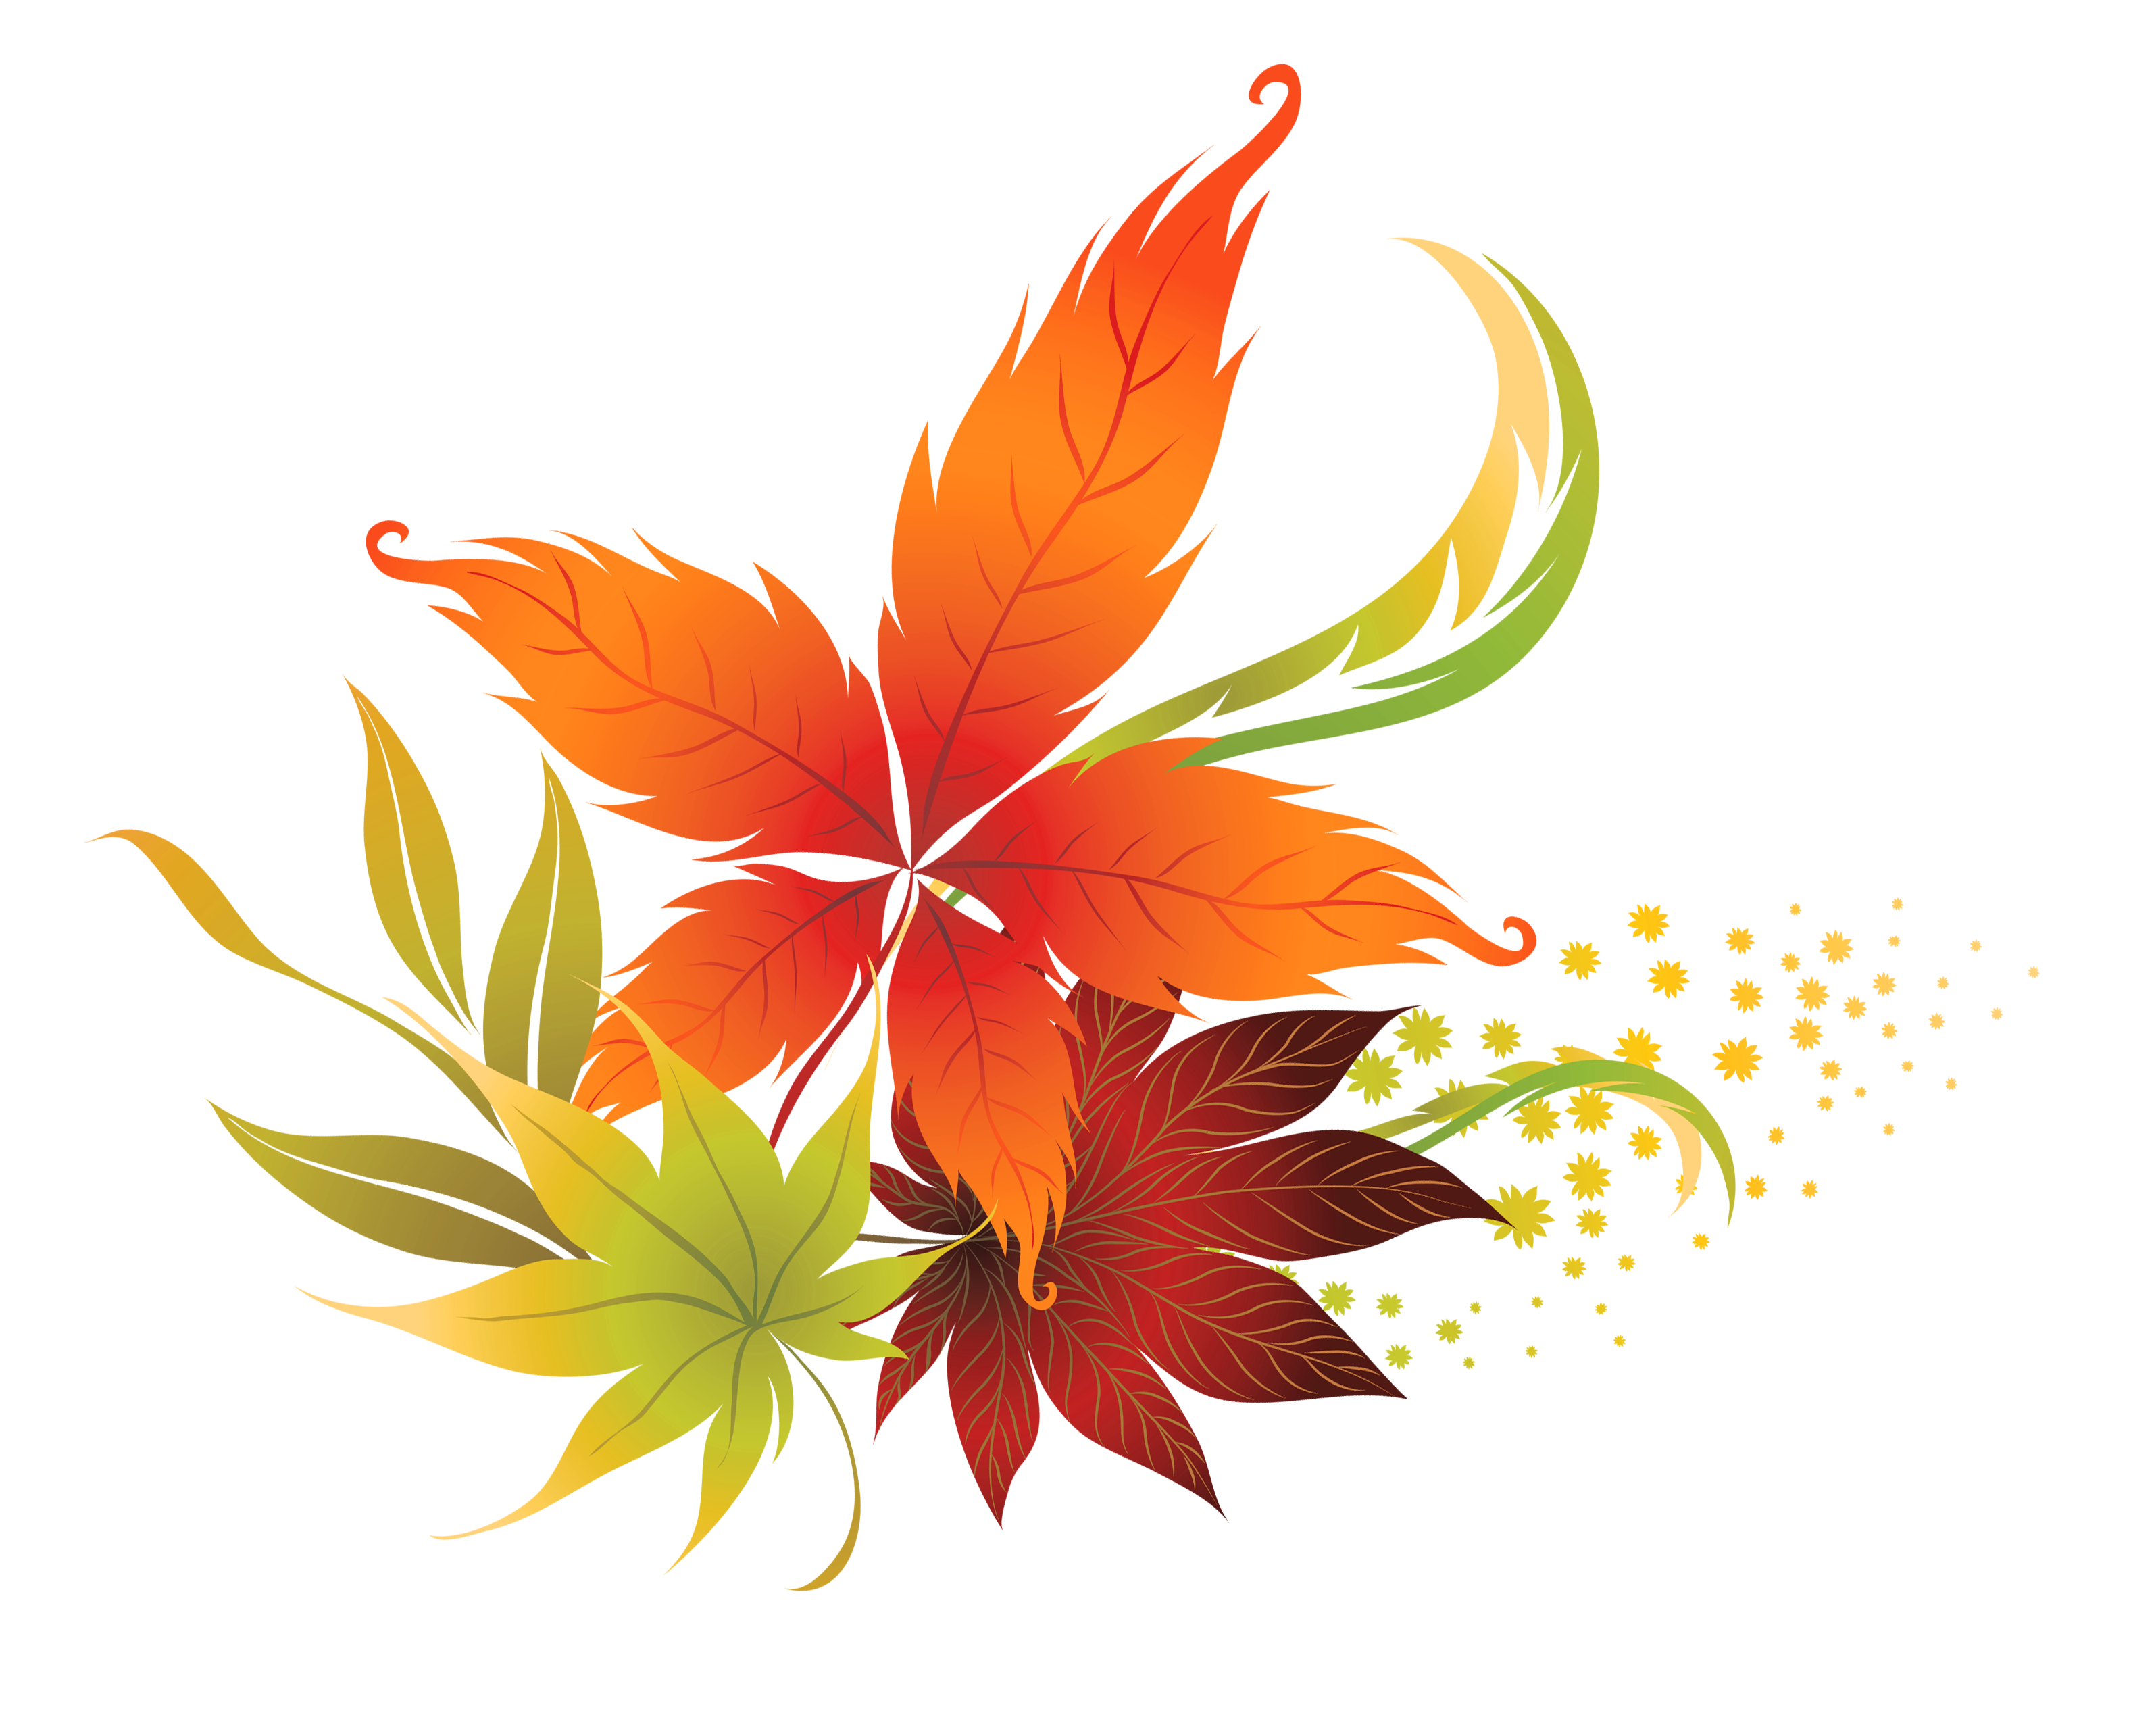 Autumn Leaves Clip Art: Free Download and Inspiration | [Your Website Name]